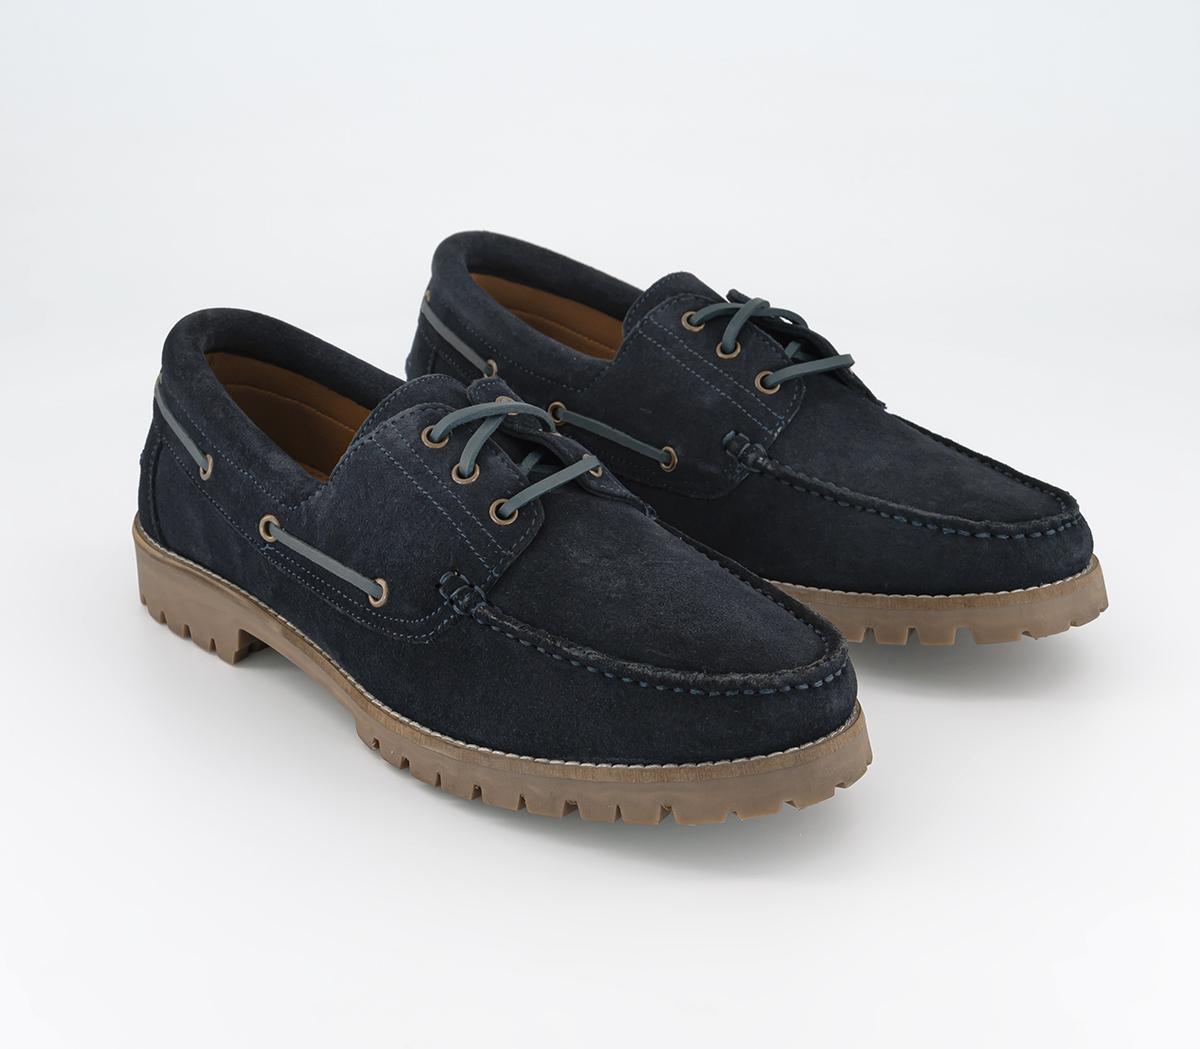 OFFICE Mens Colorado Cleated Suede Boat Shoes Navy Blue, 7